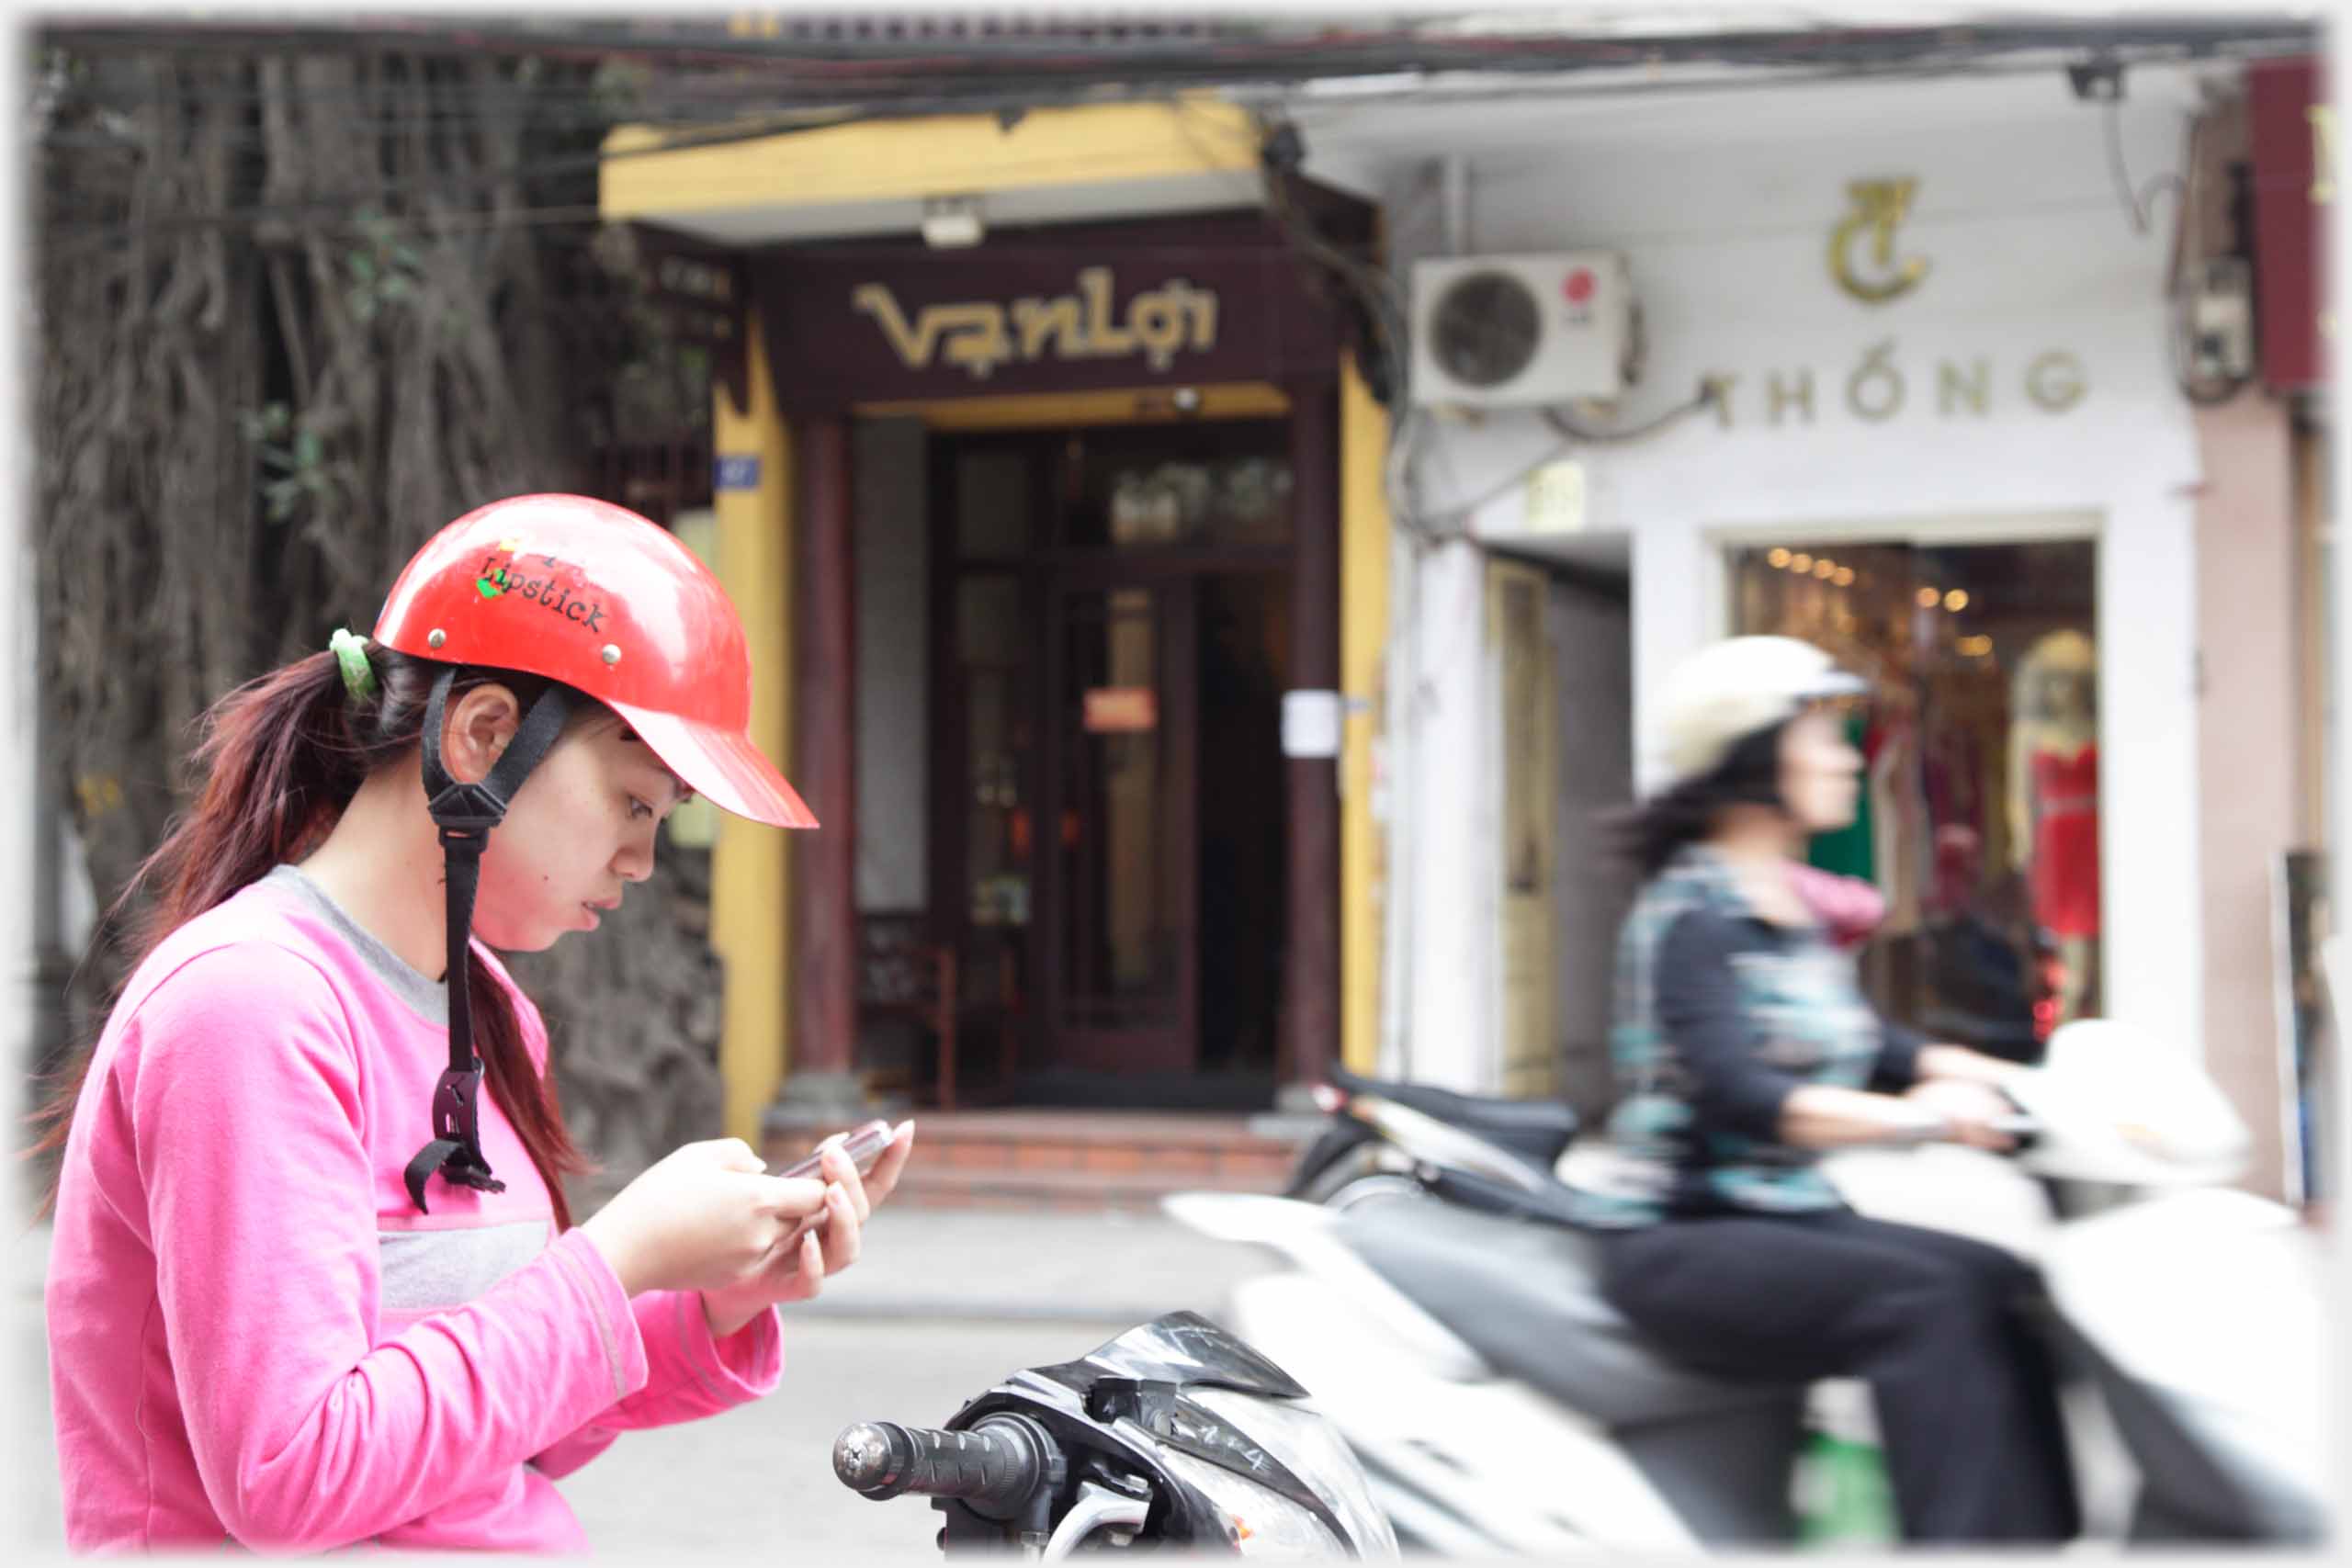 Woman in crash helmet texting, blurred image of passing woman.